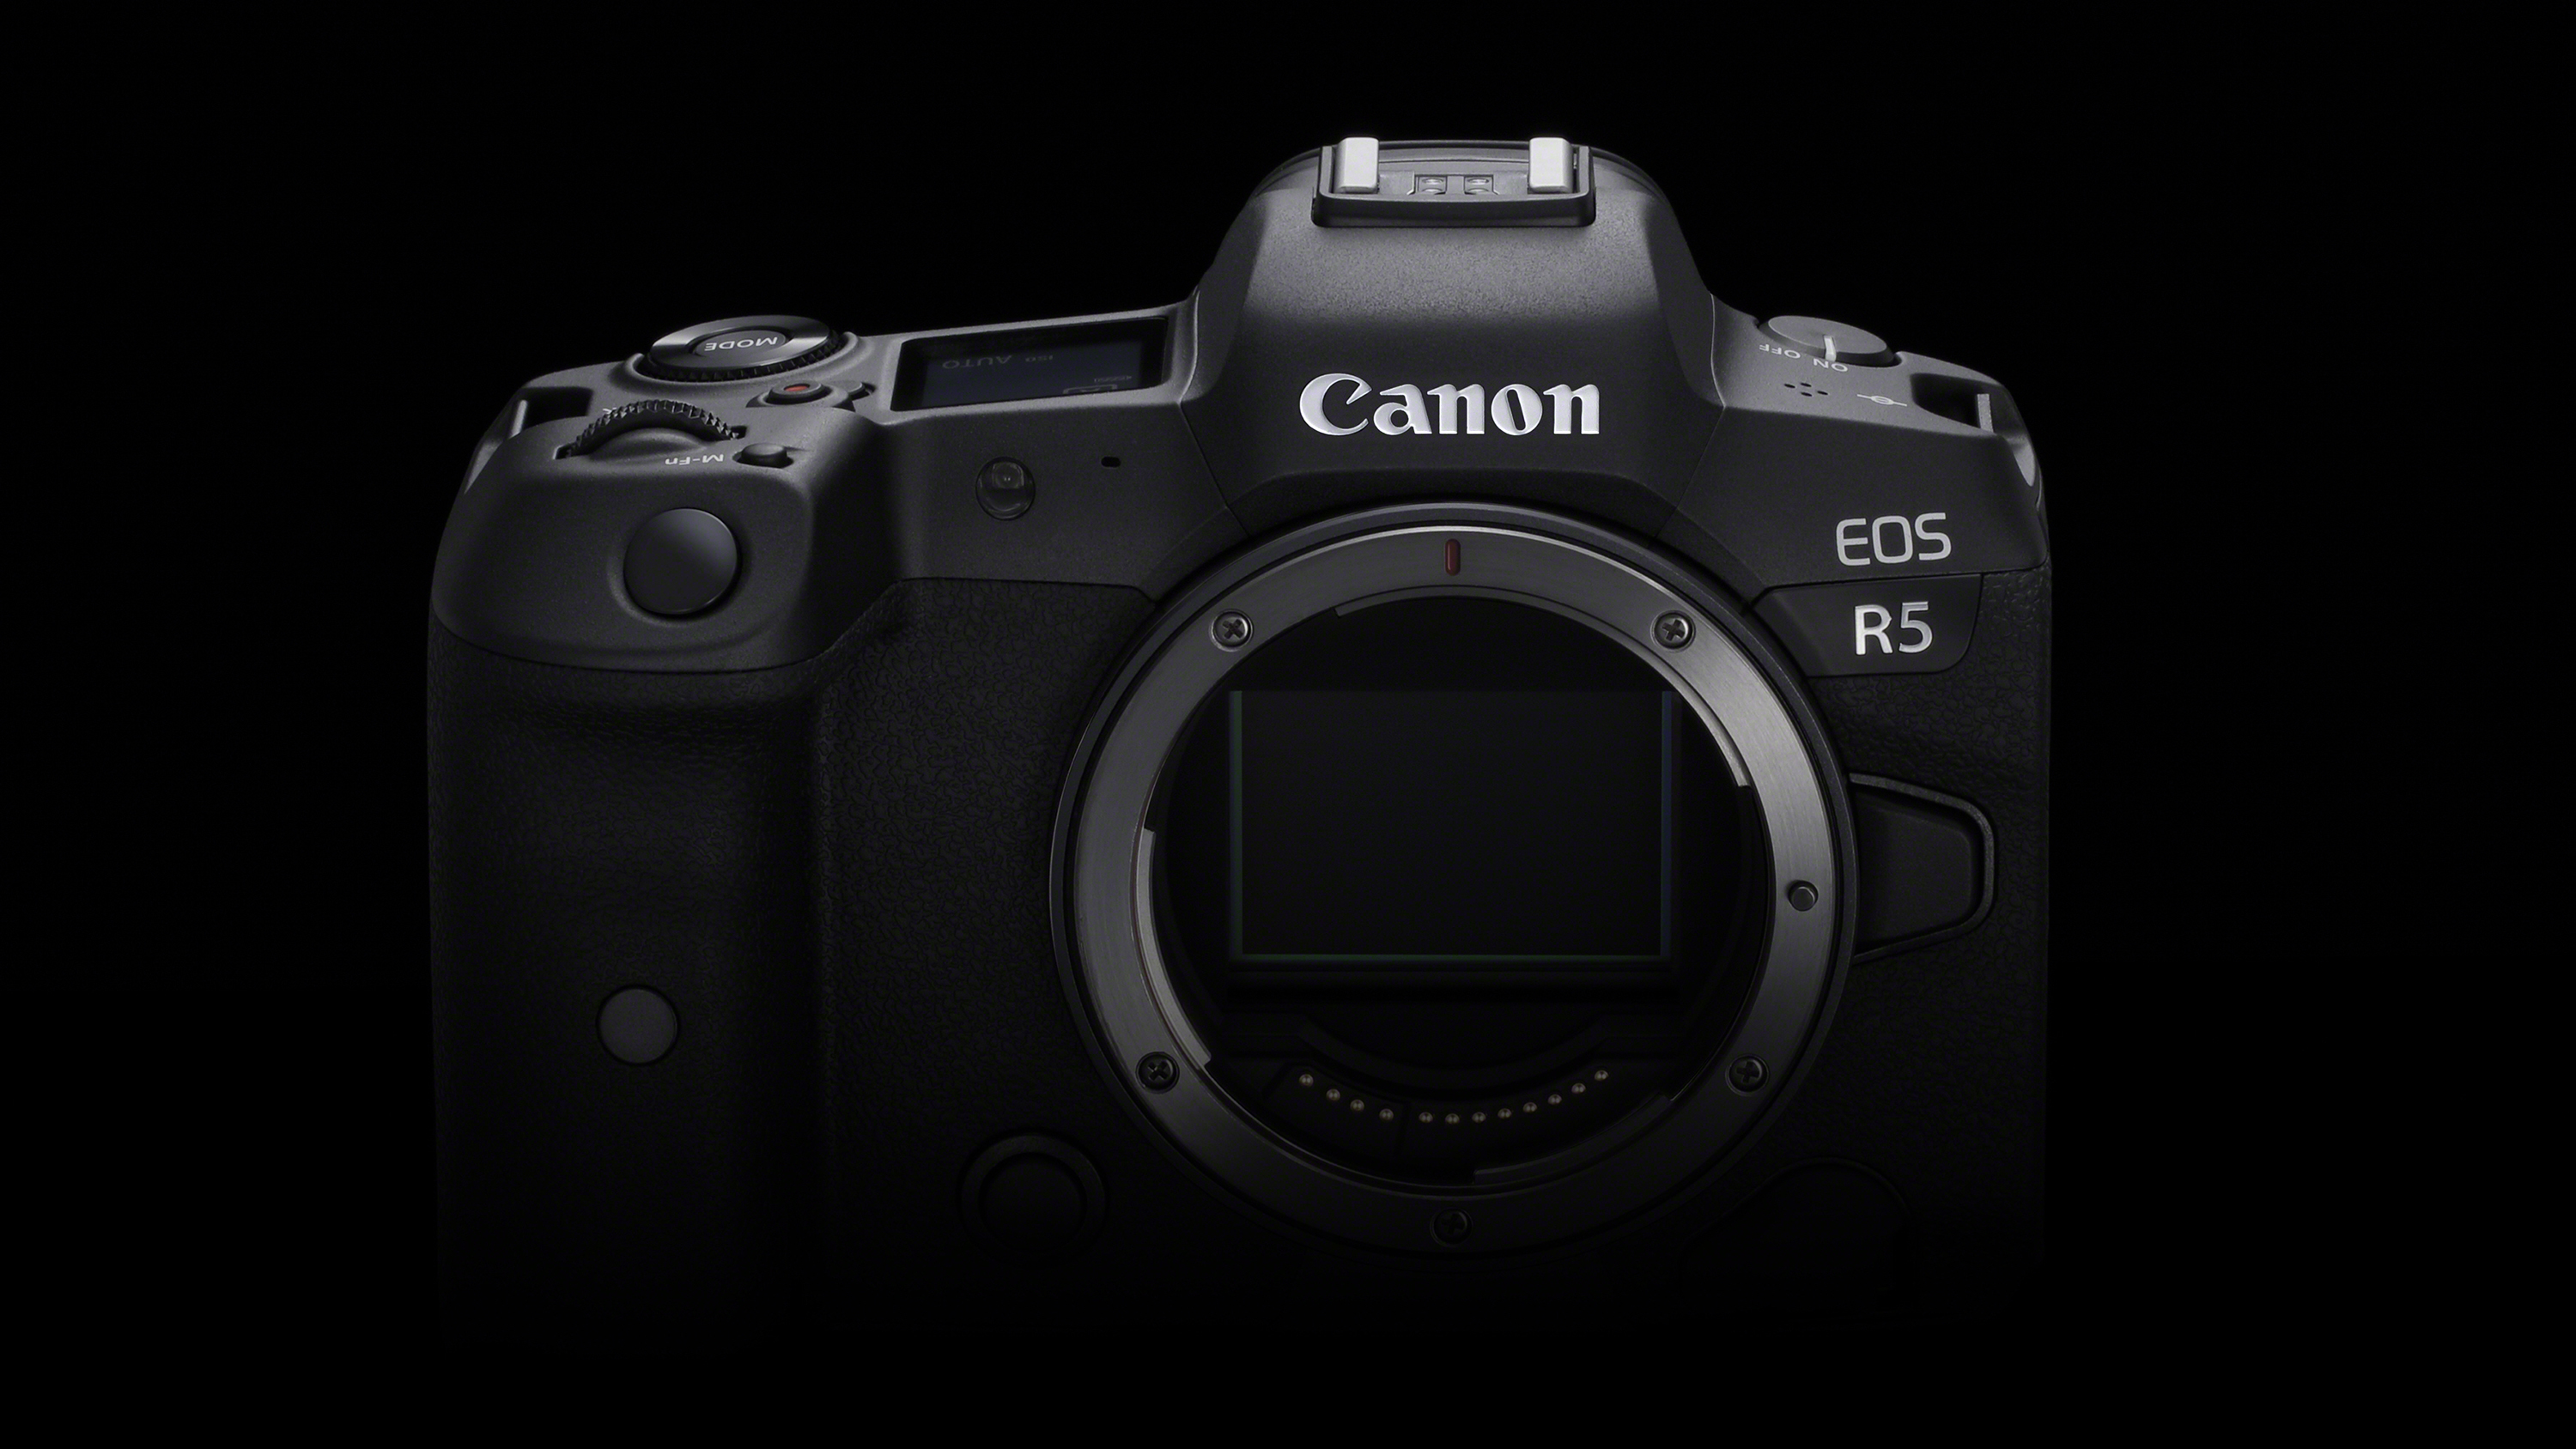 Canon EOS R5 overheating issues could be fixed by imminent 